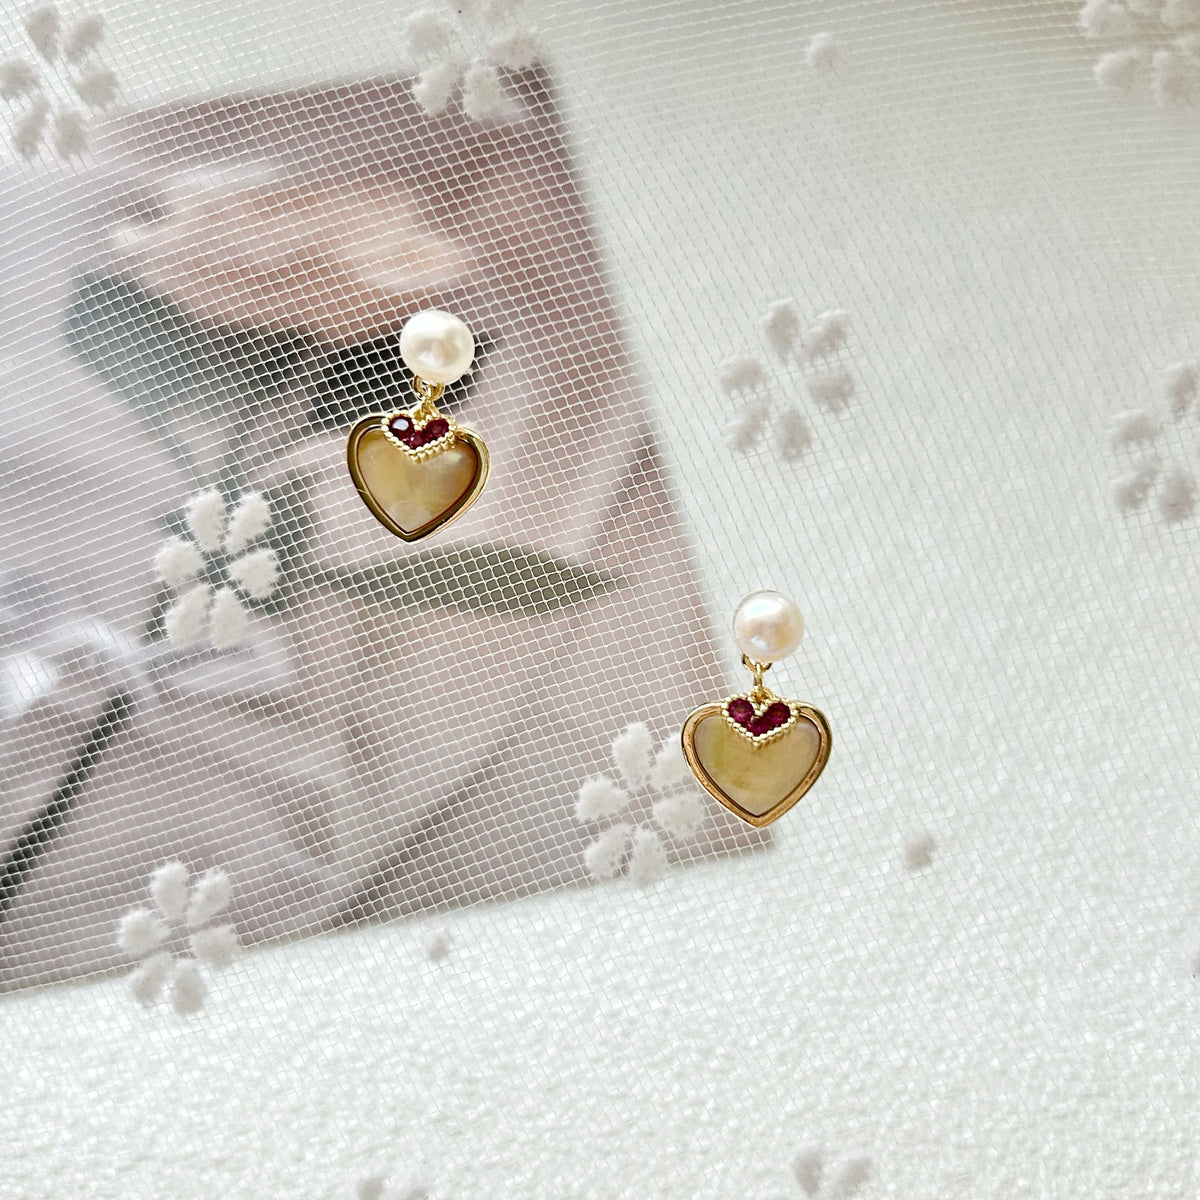 "Amber Romance" Pearl Drop Earrings with Heart-Shaped Mother of Pearl and Garnet Accents